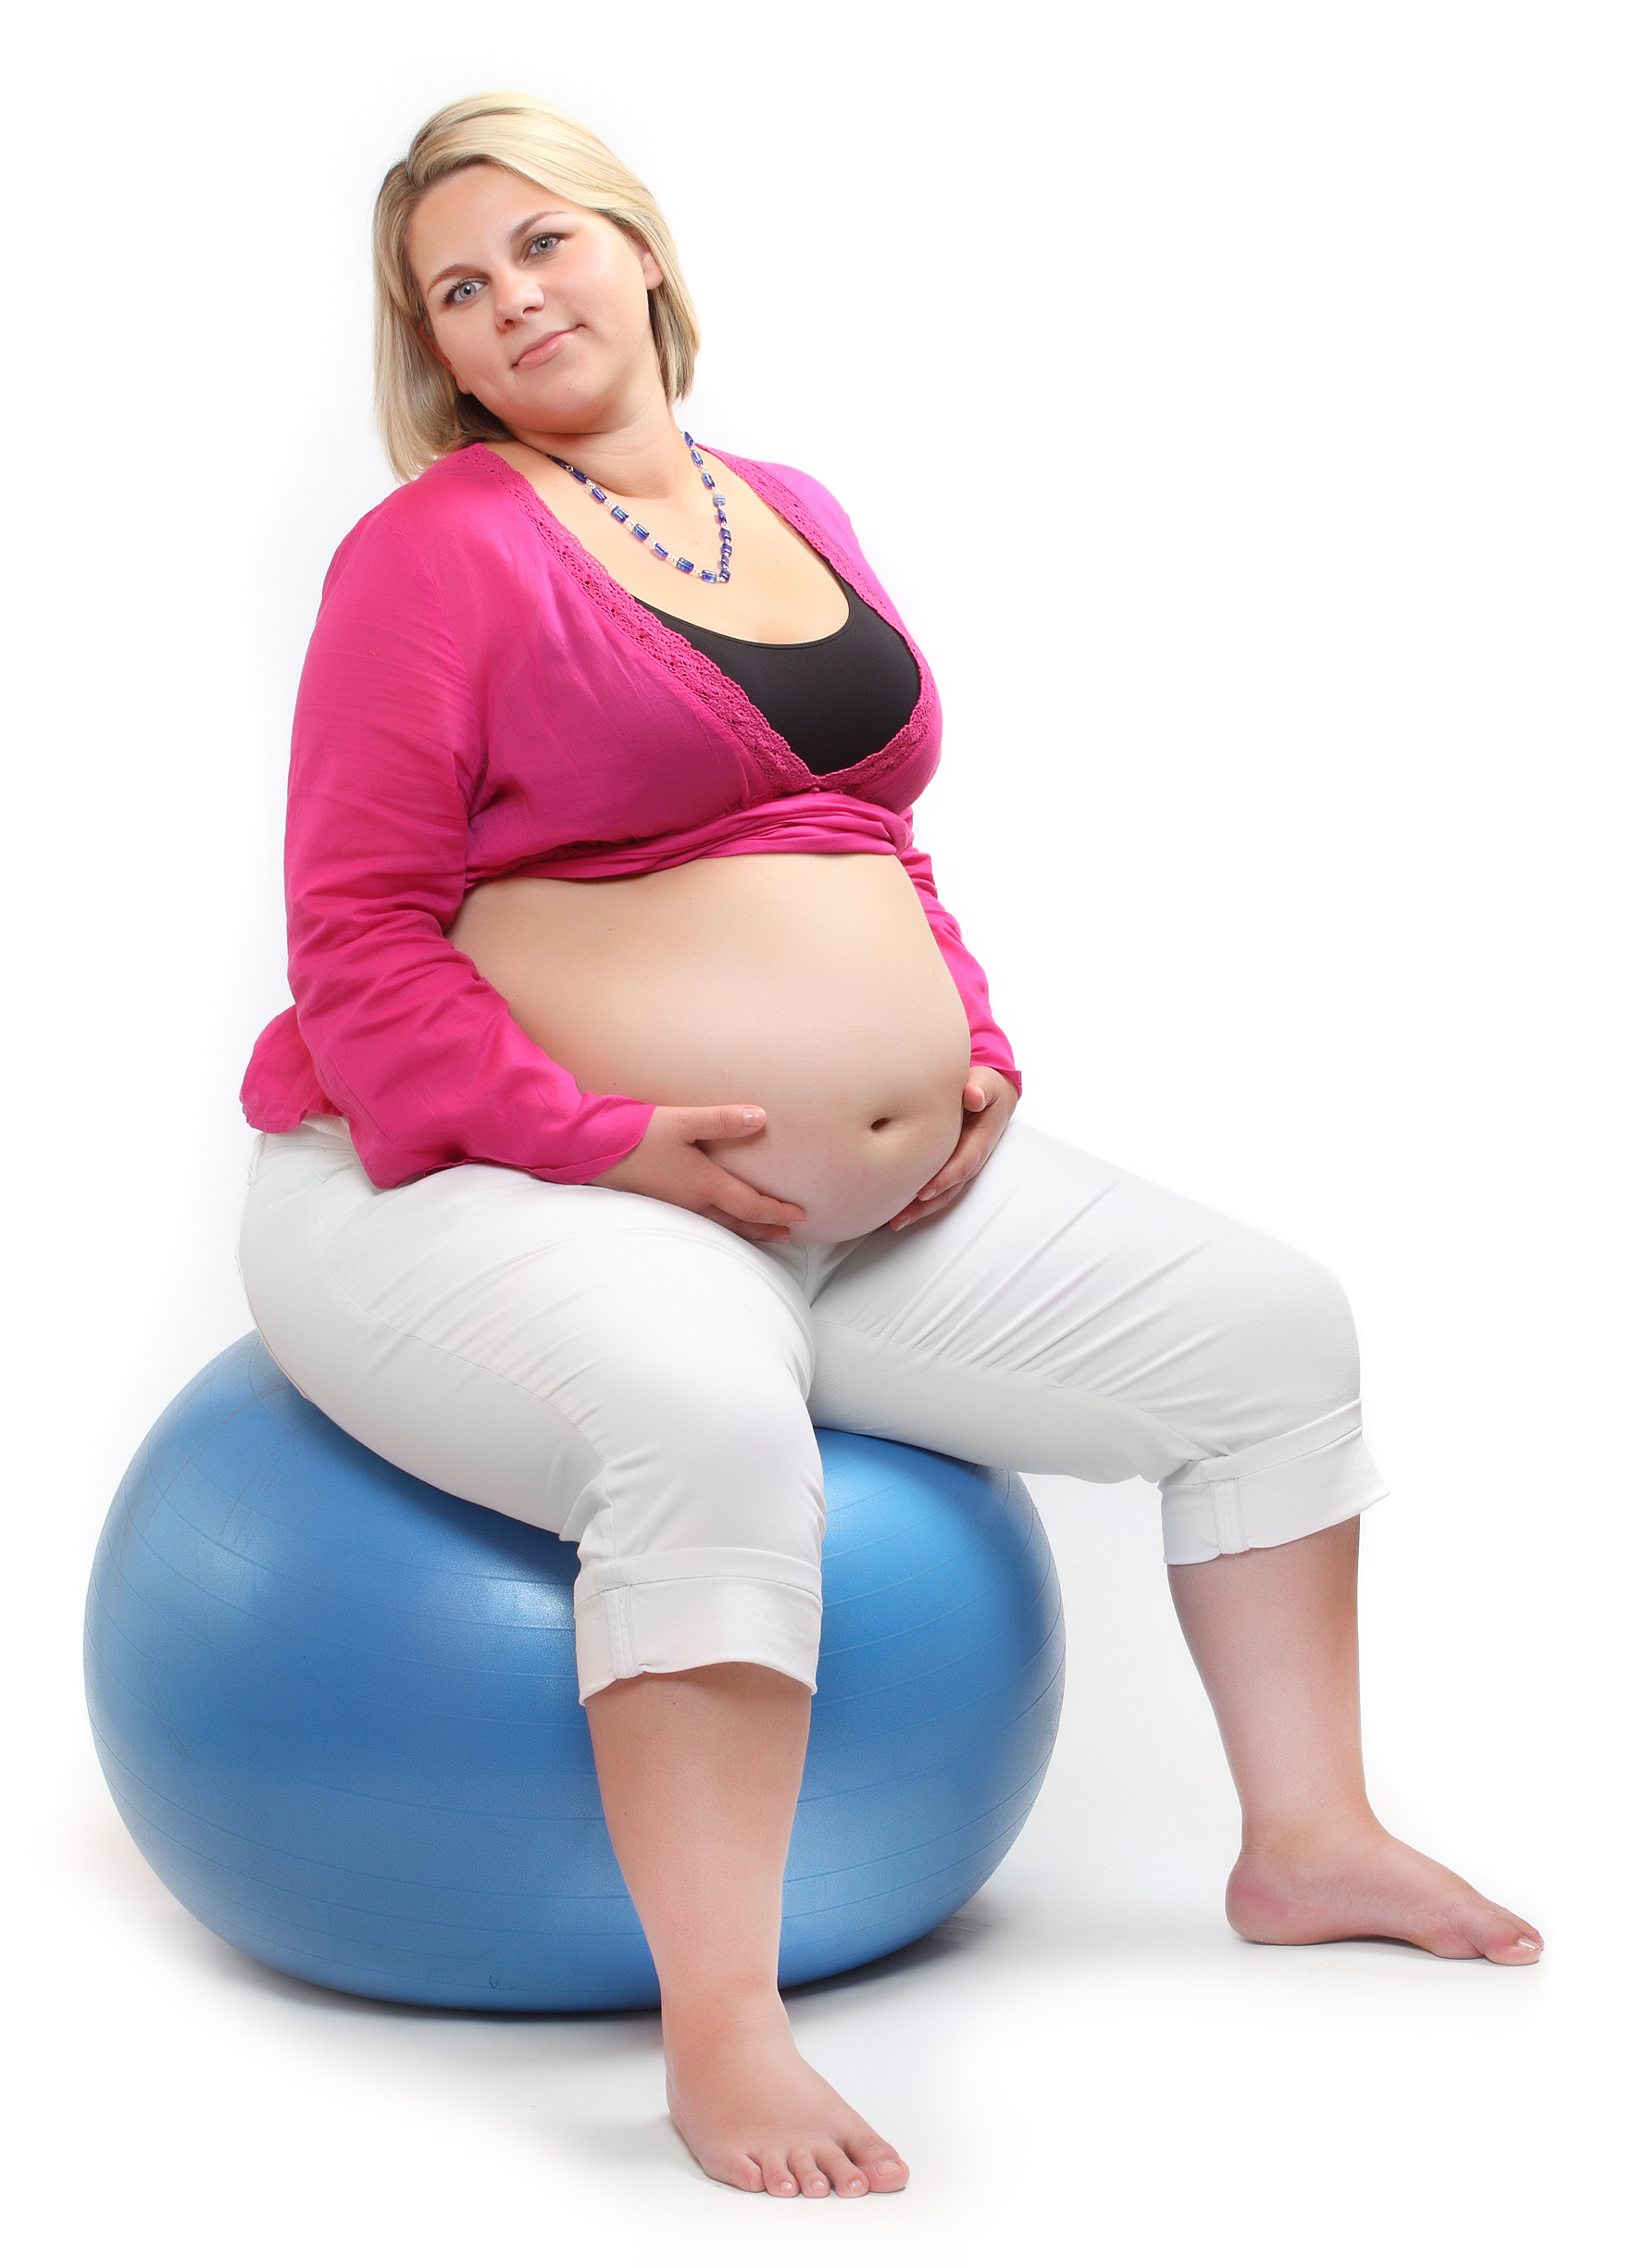 Overweight and Obese Women Should Scale Back Weight Gain During Pregnancy -  IDEA Health & Fitness Association